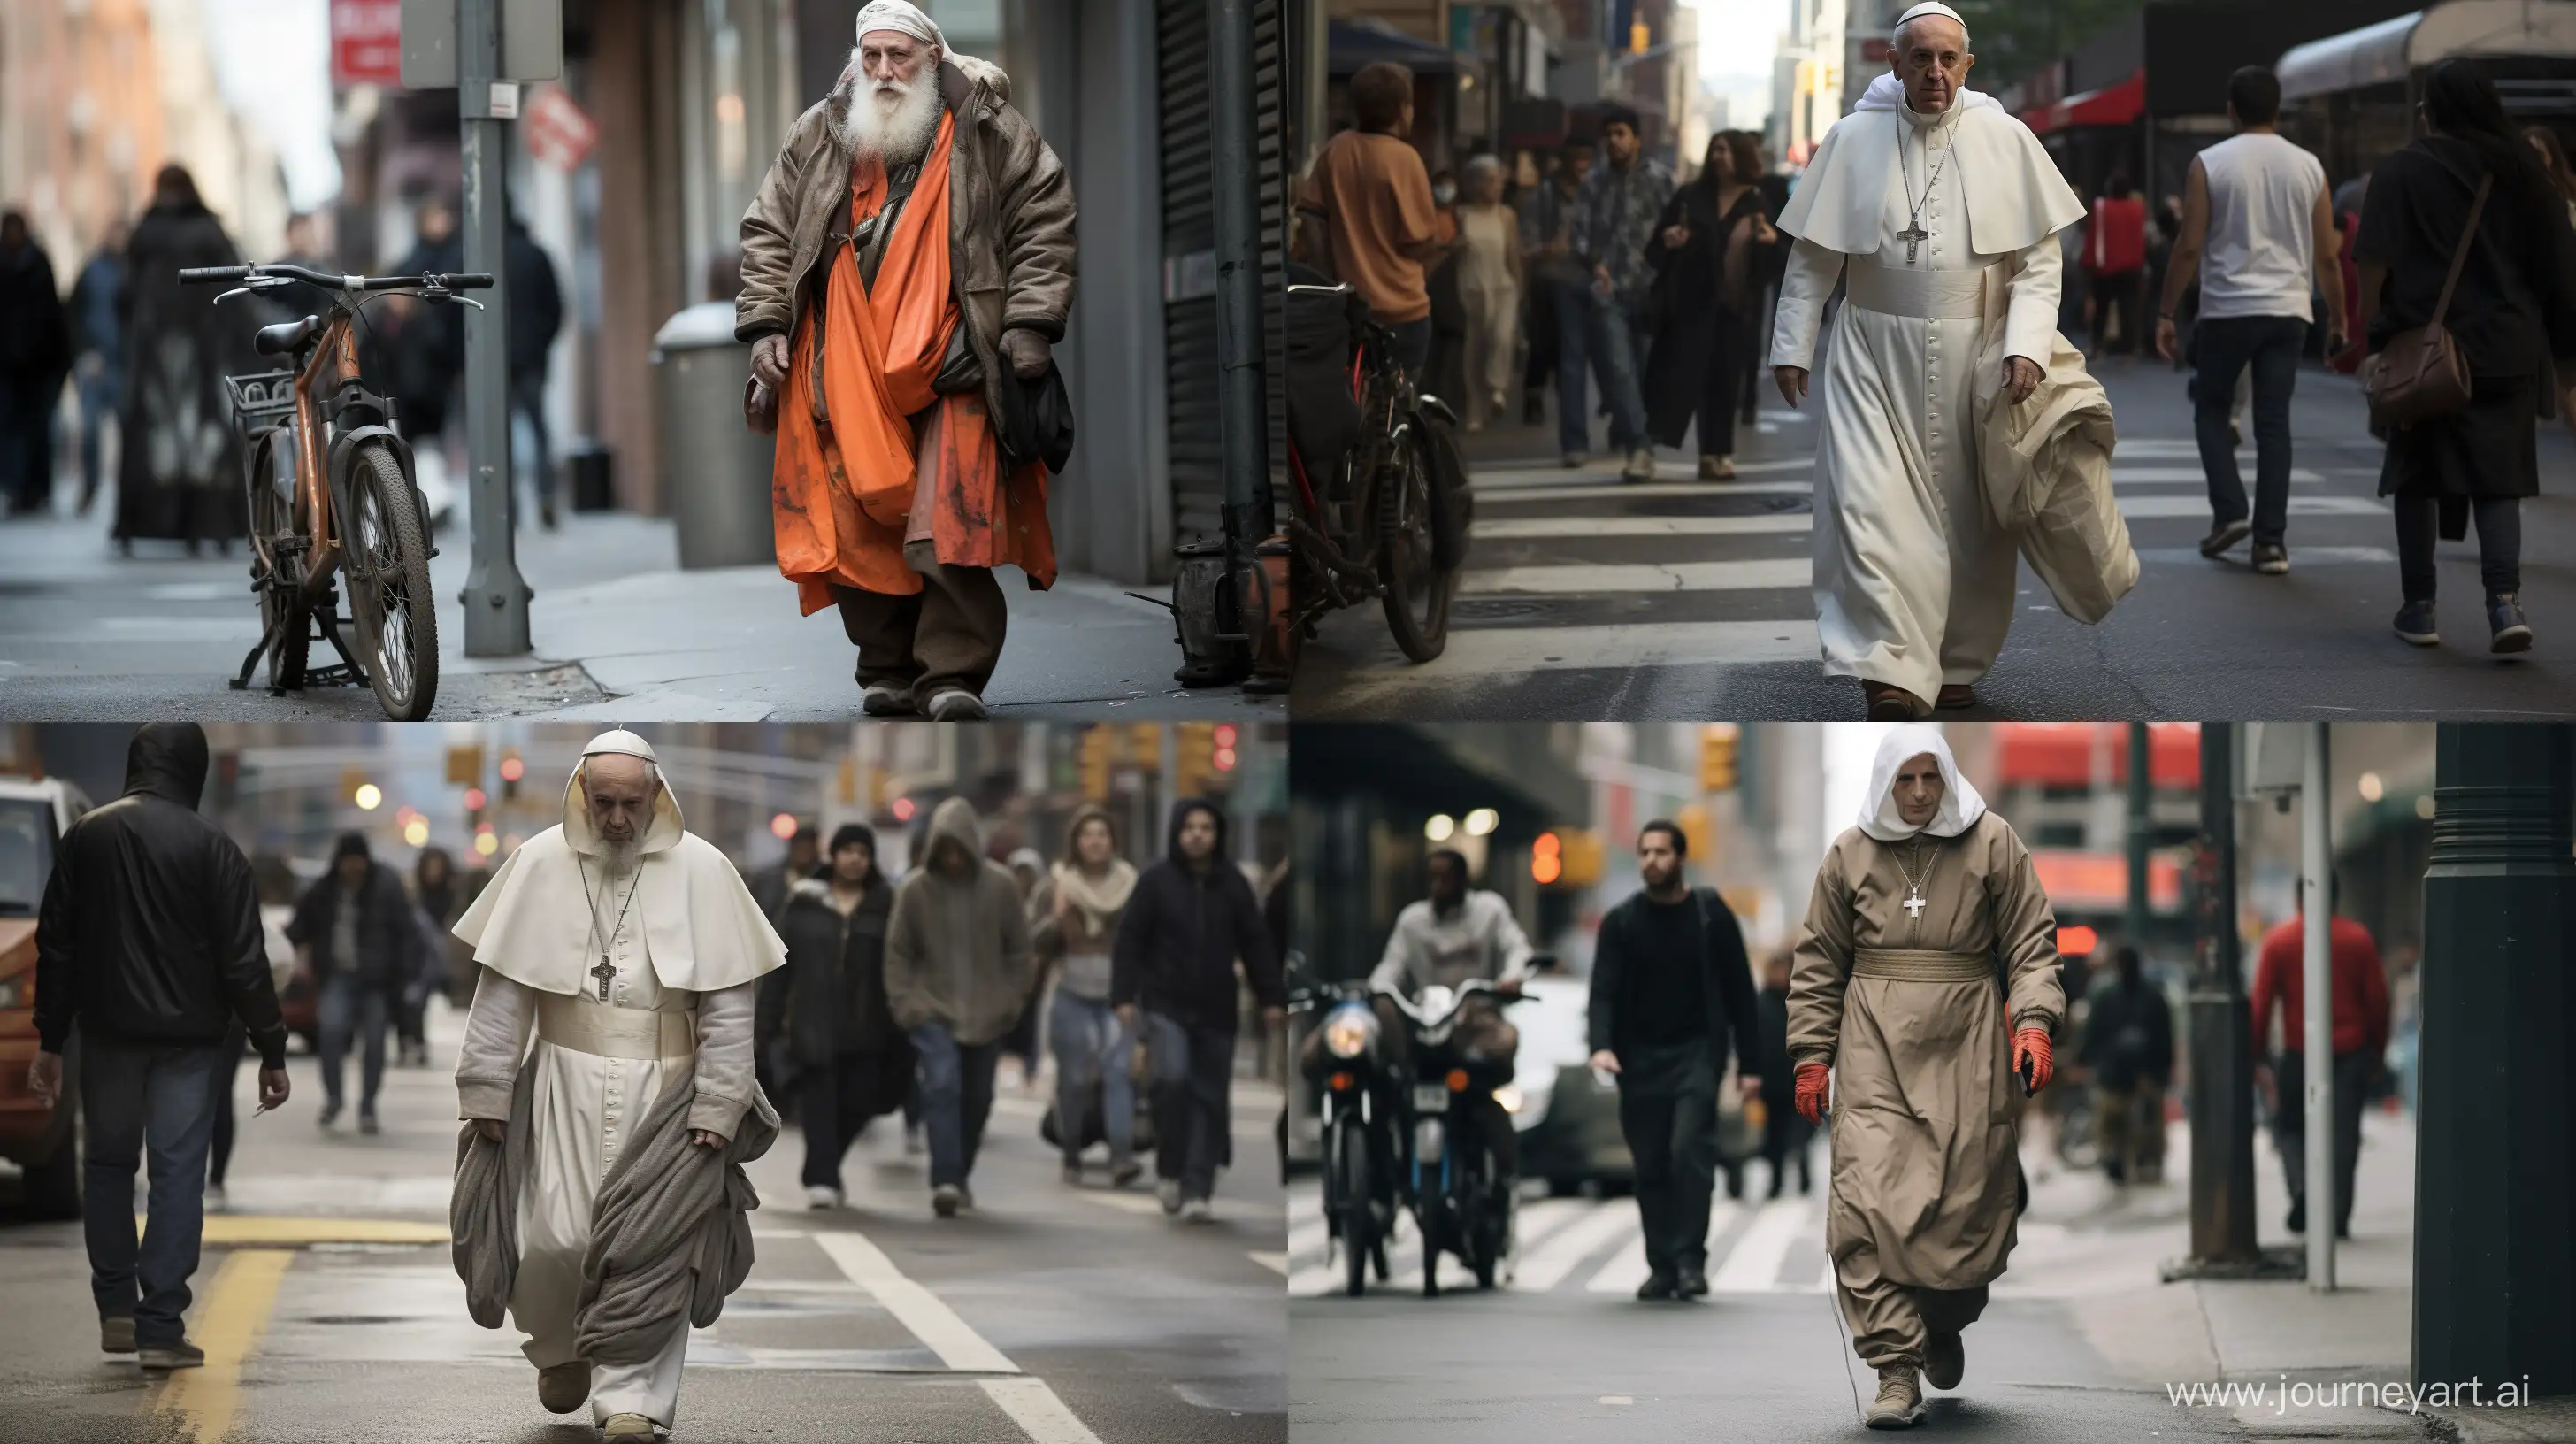 Pope-in-Homeless-Attire-Strolling-Through-the-City